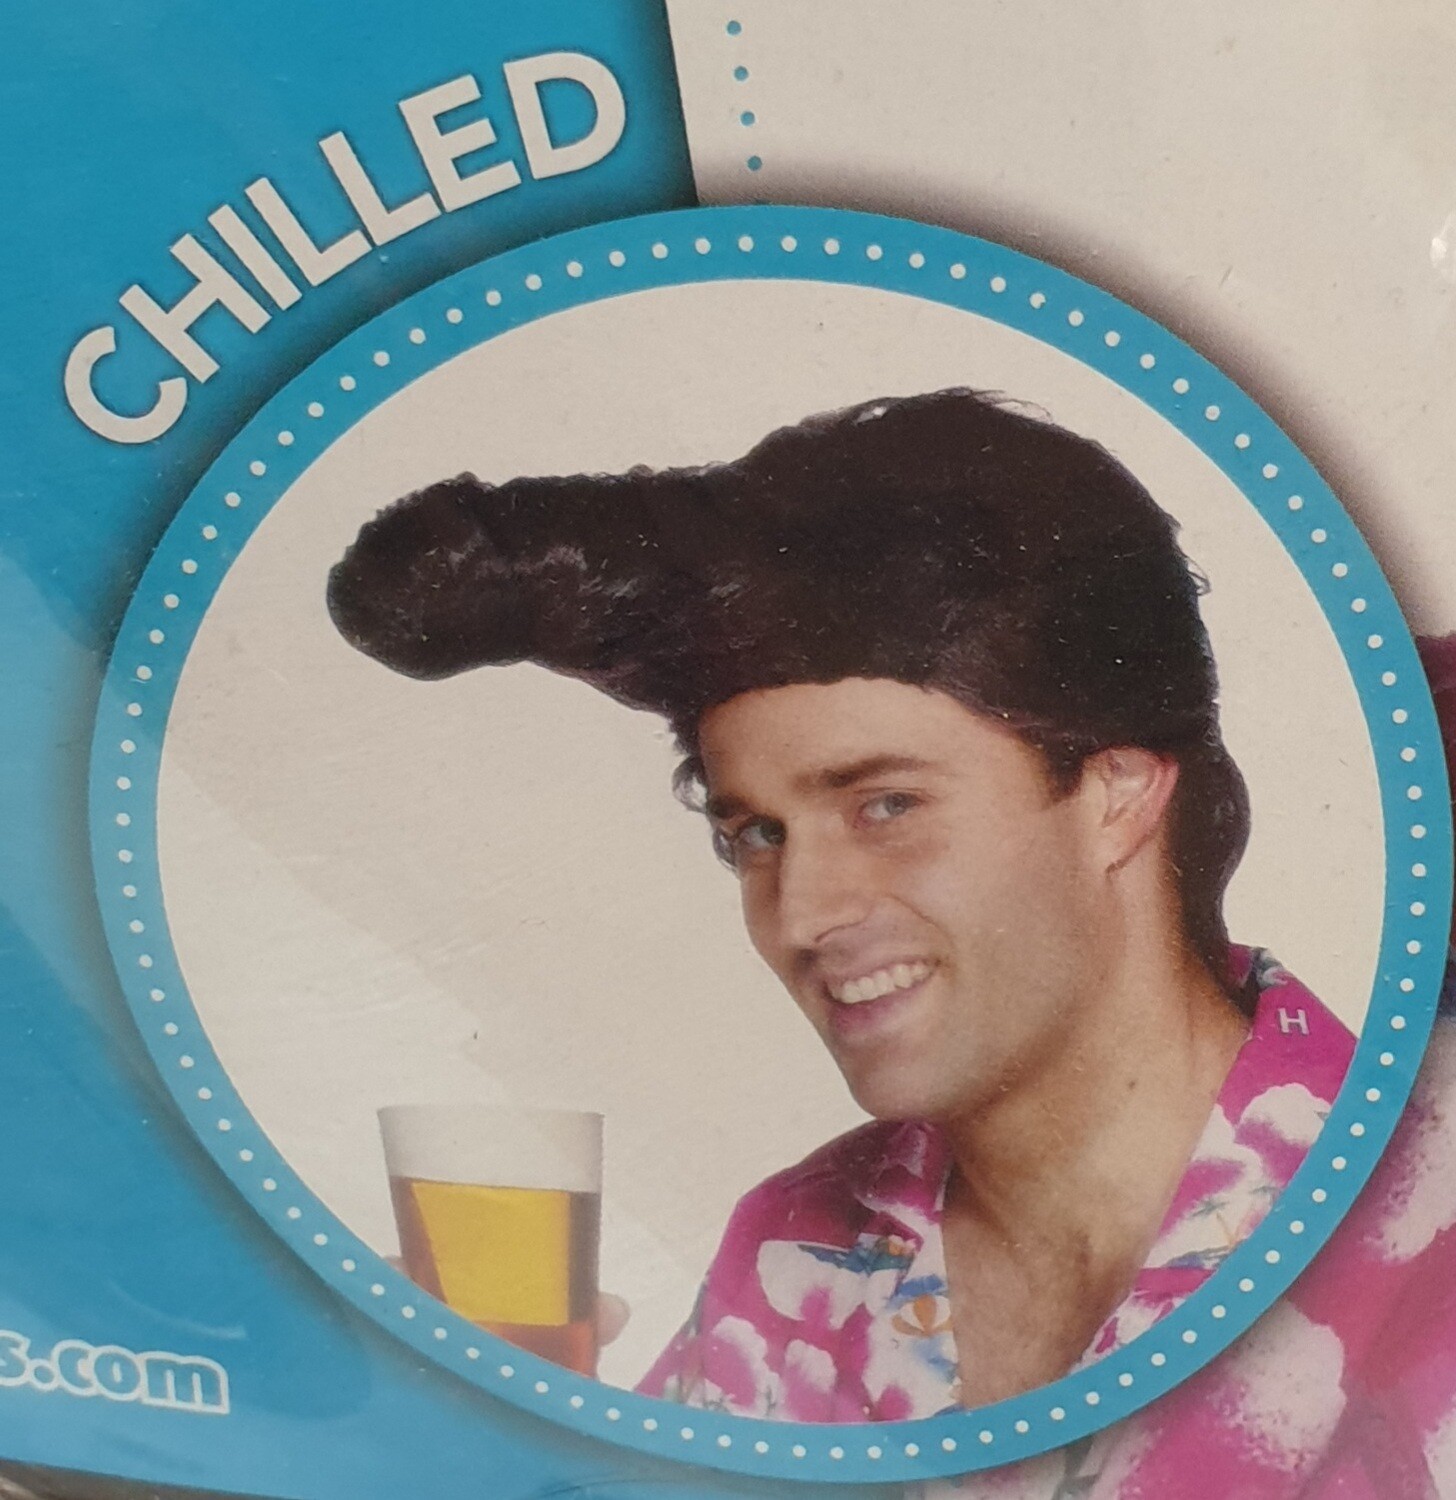 Chilled beer wig